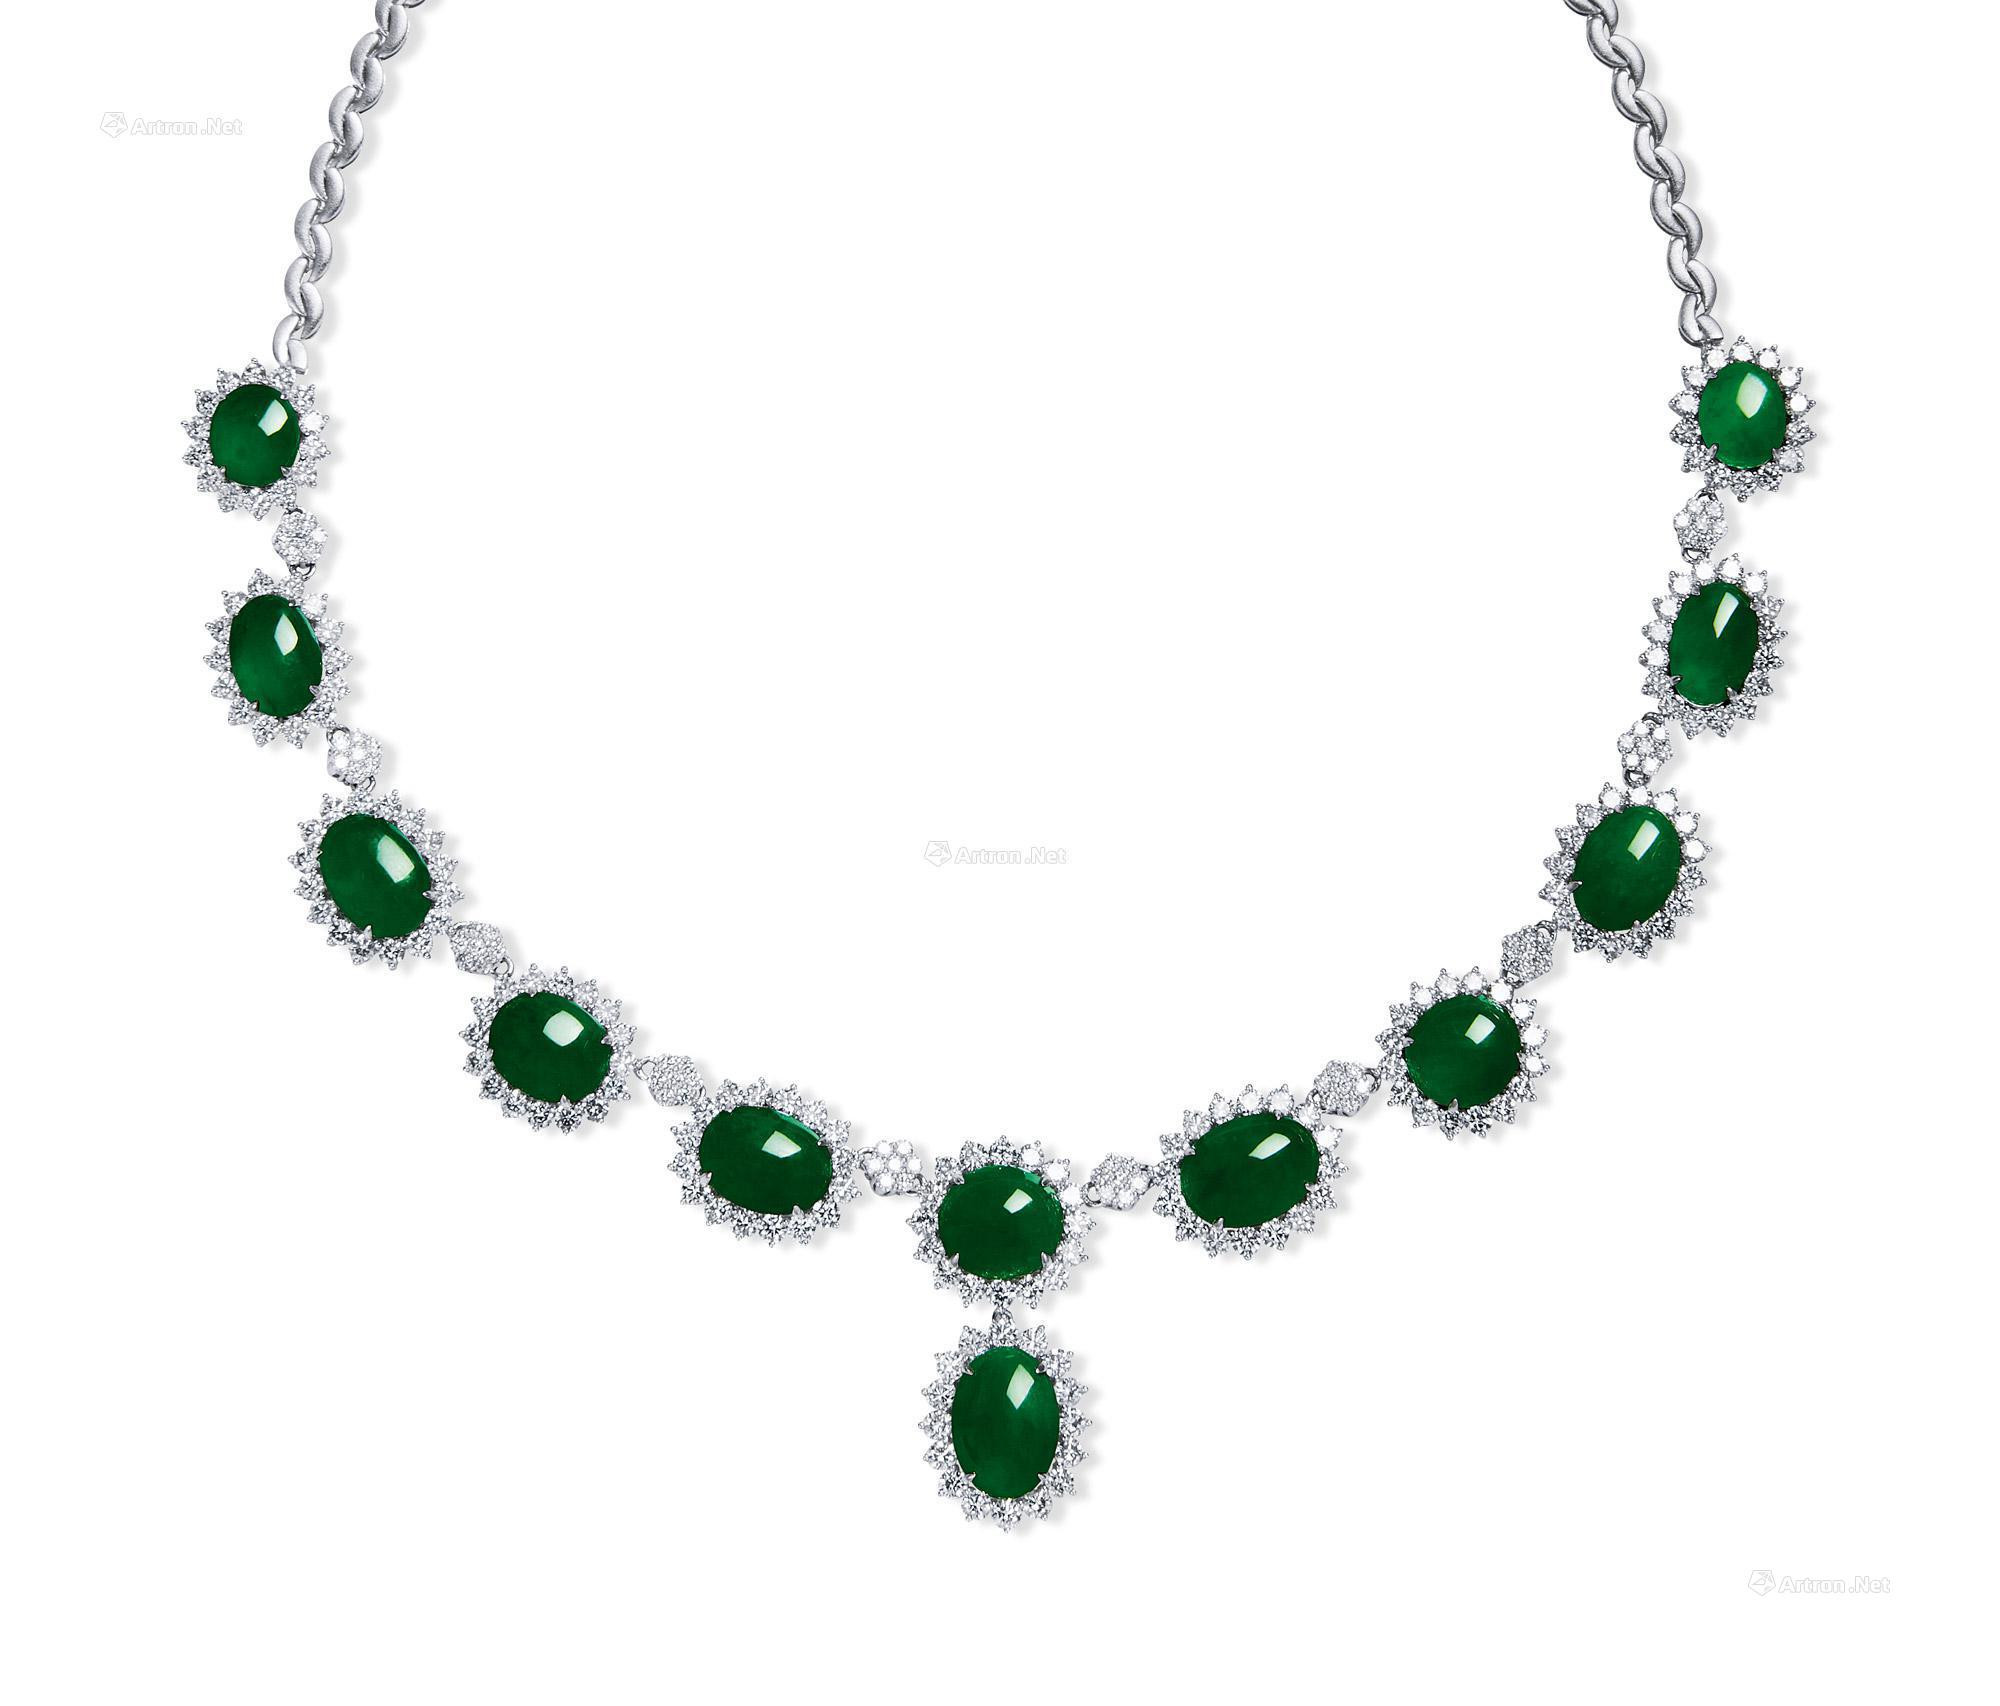 A BURMESE JADEITE AND DIAMOND NECKLACE MOUNTED IN 18K WHITE GOLD